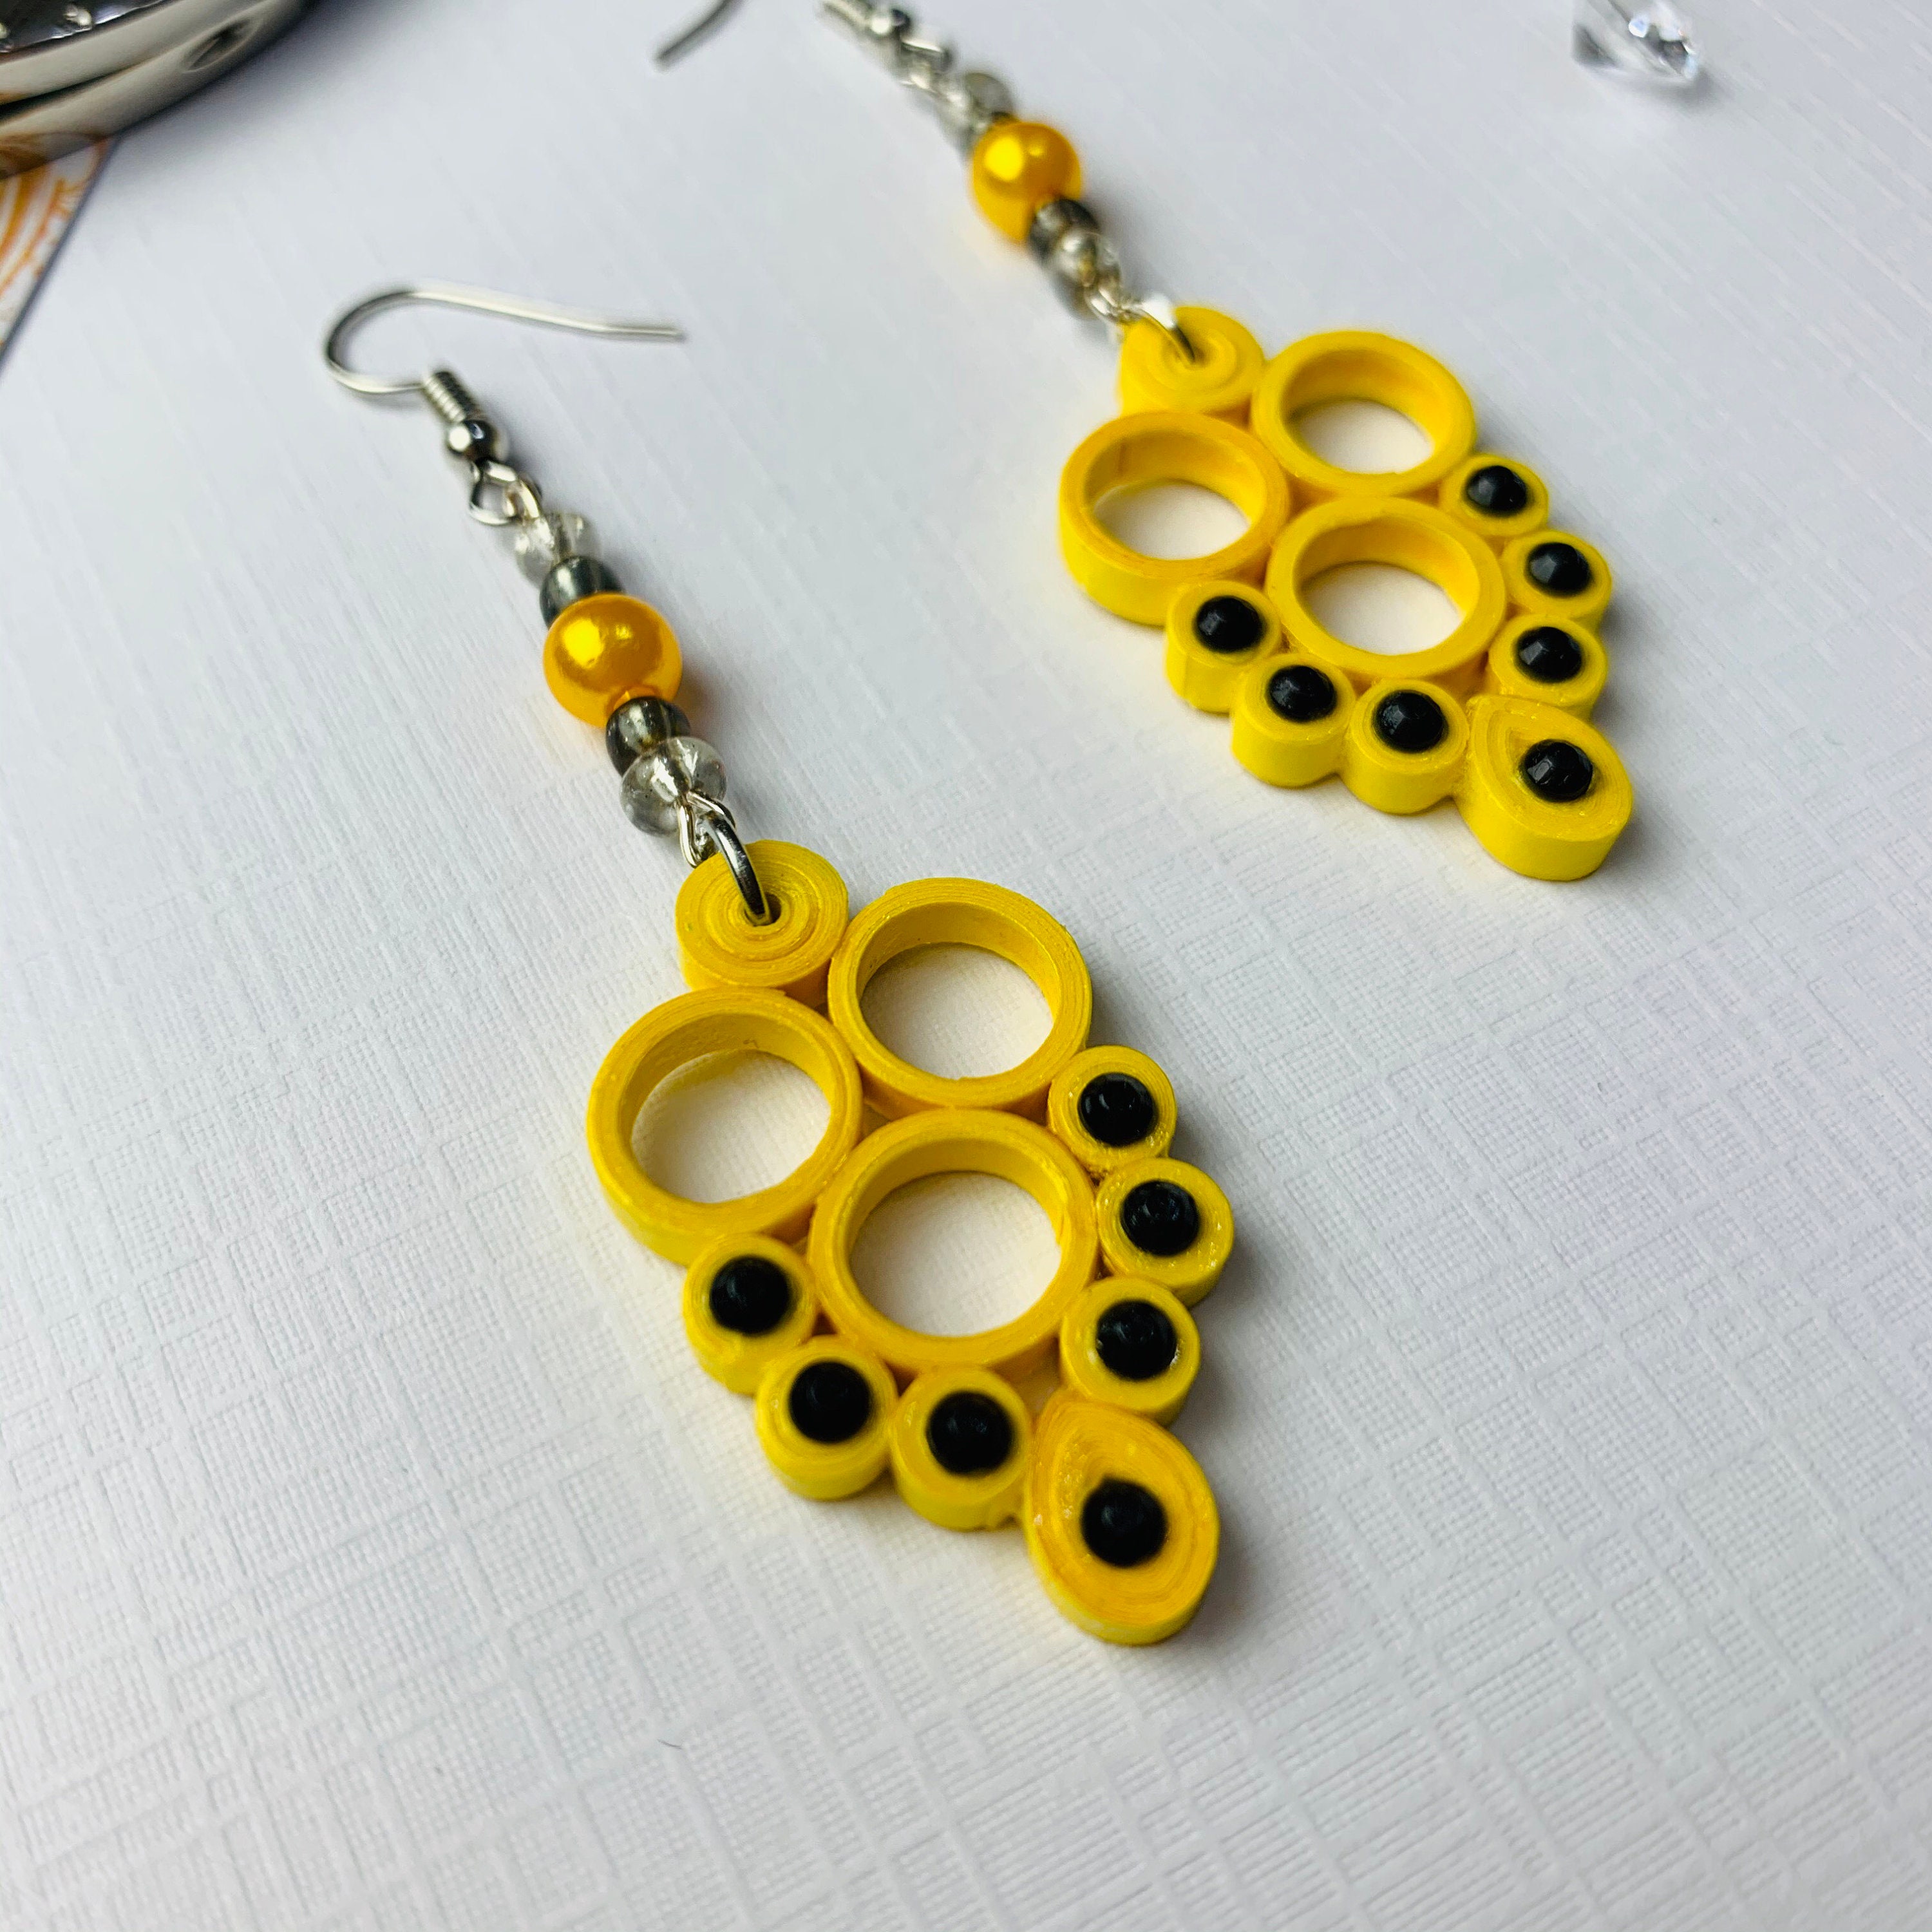 Quilling Earrings Tutorial: How to make simple Quilling Earrings - Paper  Quilling Art - YouTube